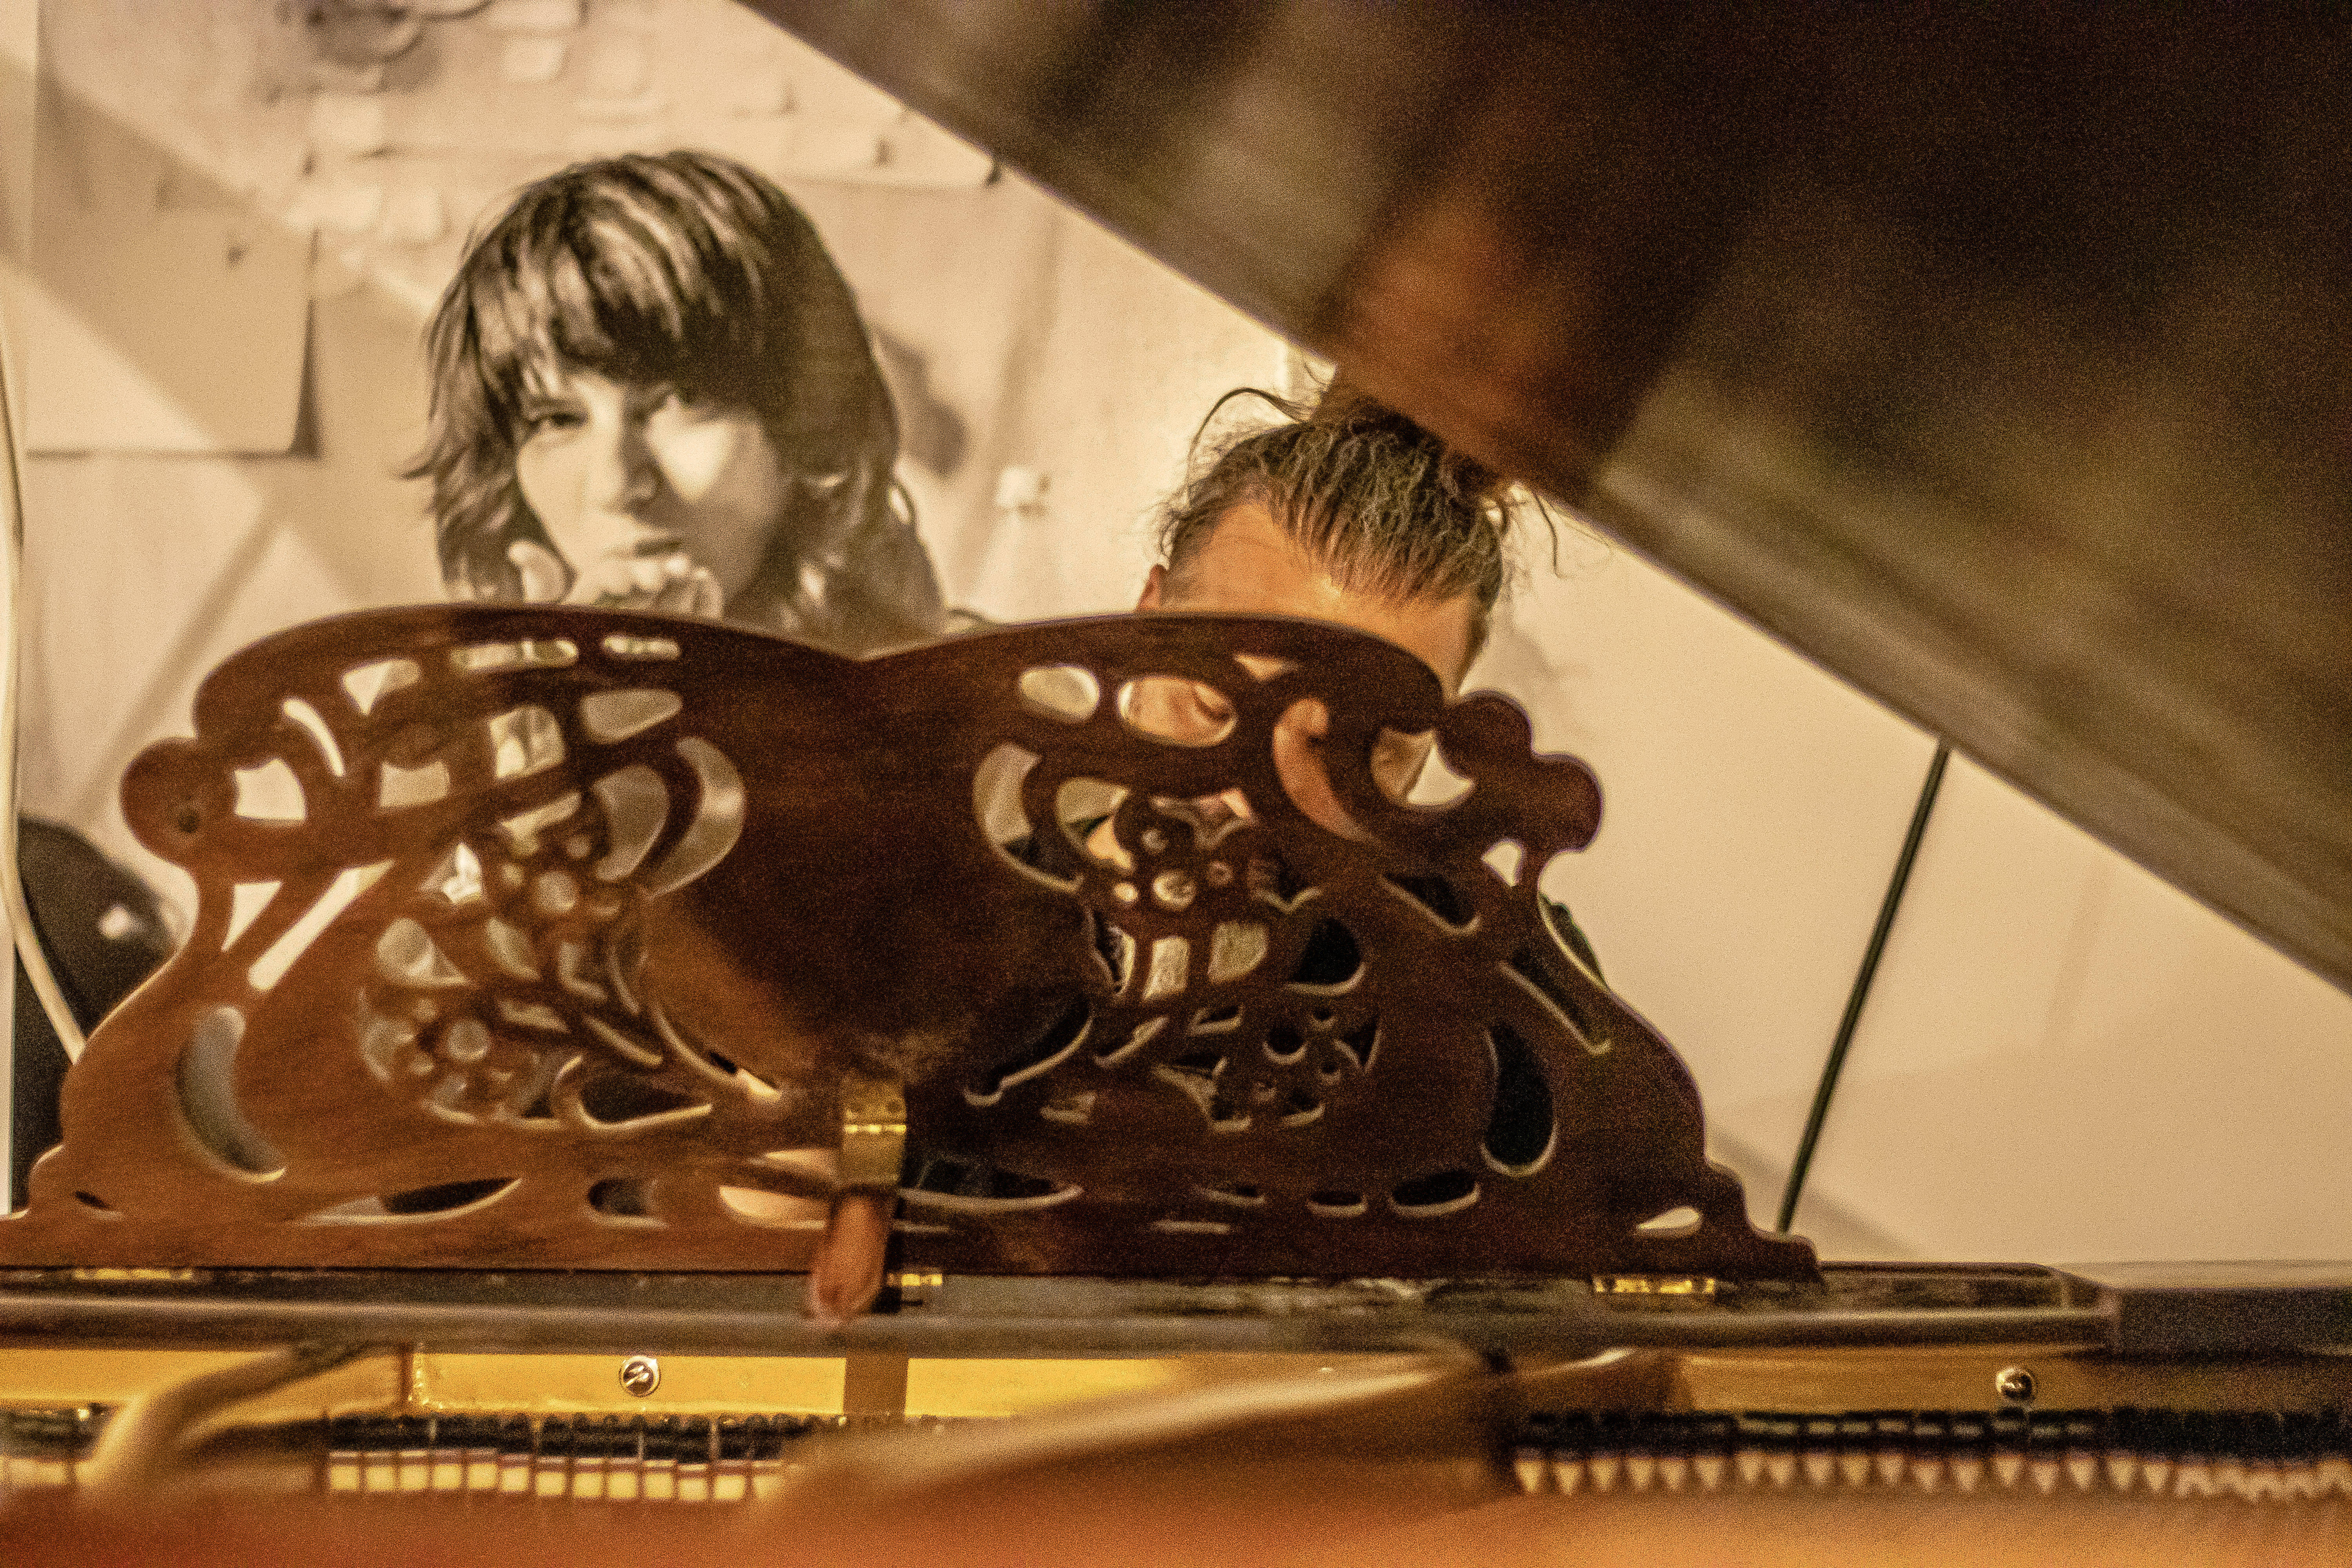 George Bokos (Grindhouse Studios Athens/Spine Audio) with the John Broadwood & Sons grand piano and a large photographic print behind him.